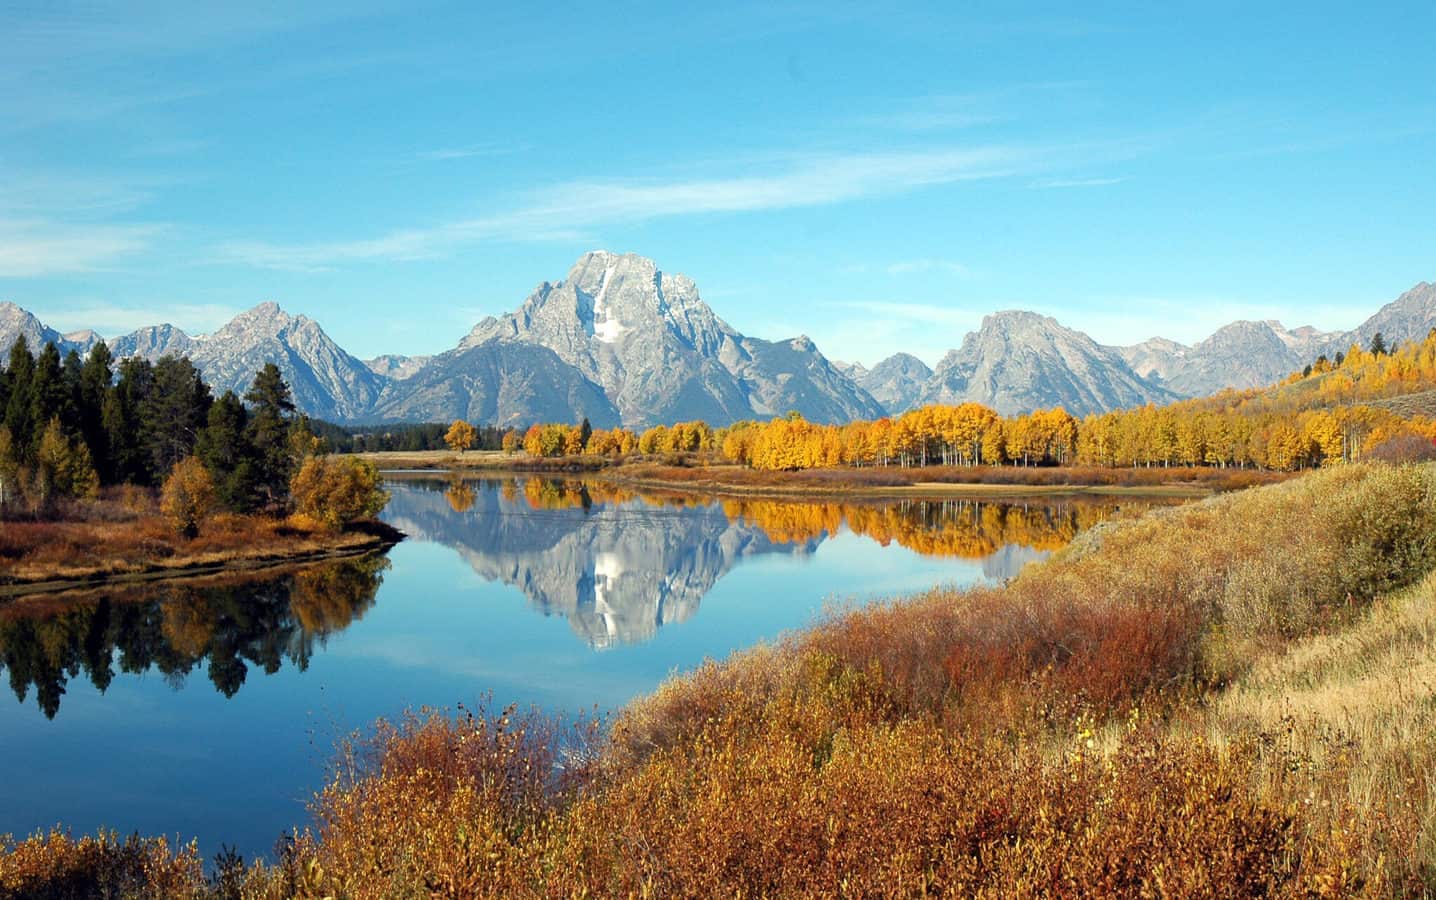 Campsites In Grand Teton National Park Are Now Reservation-Only